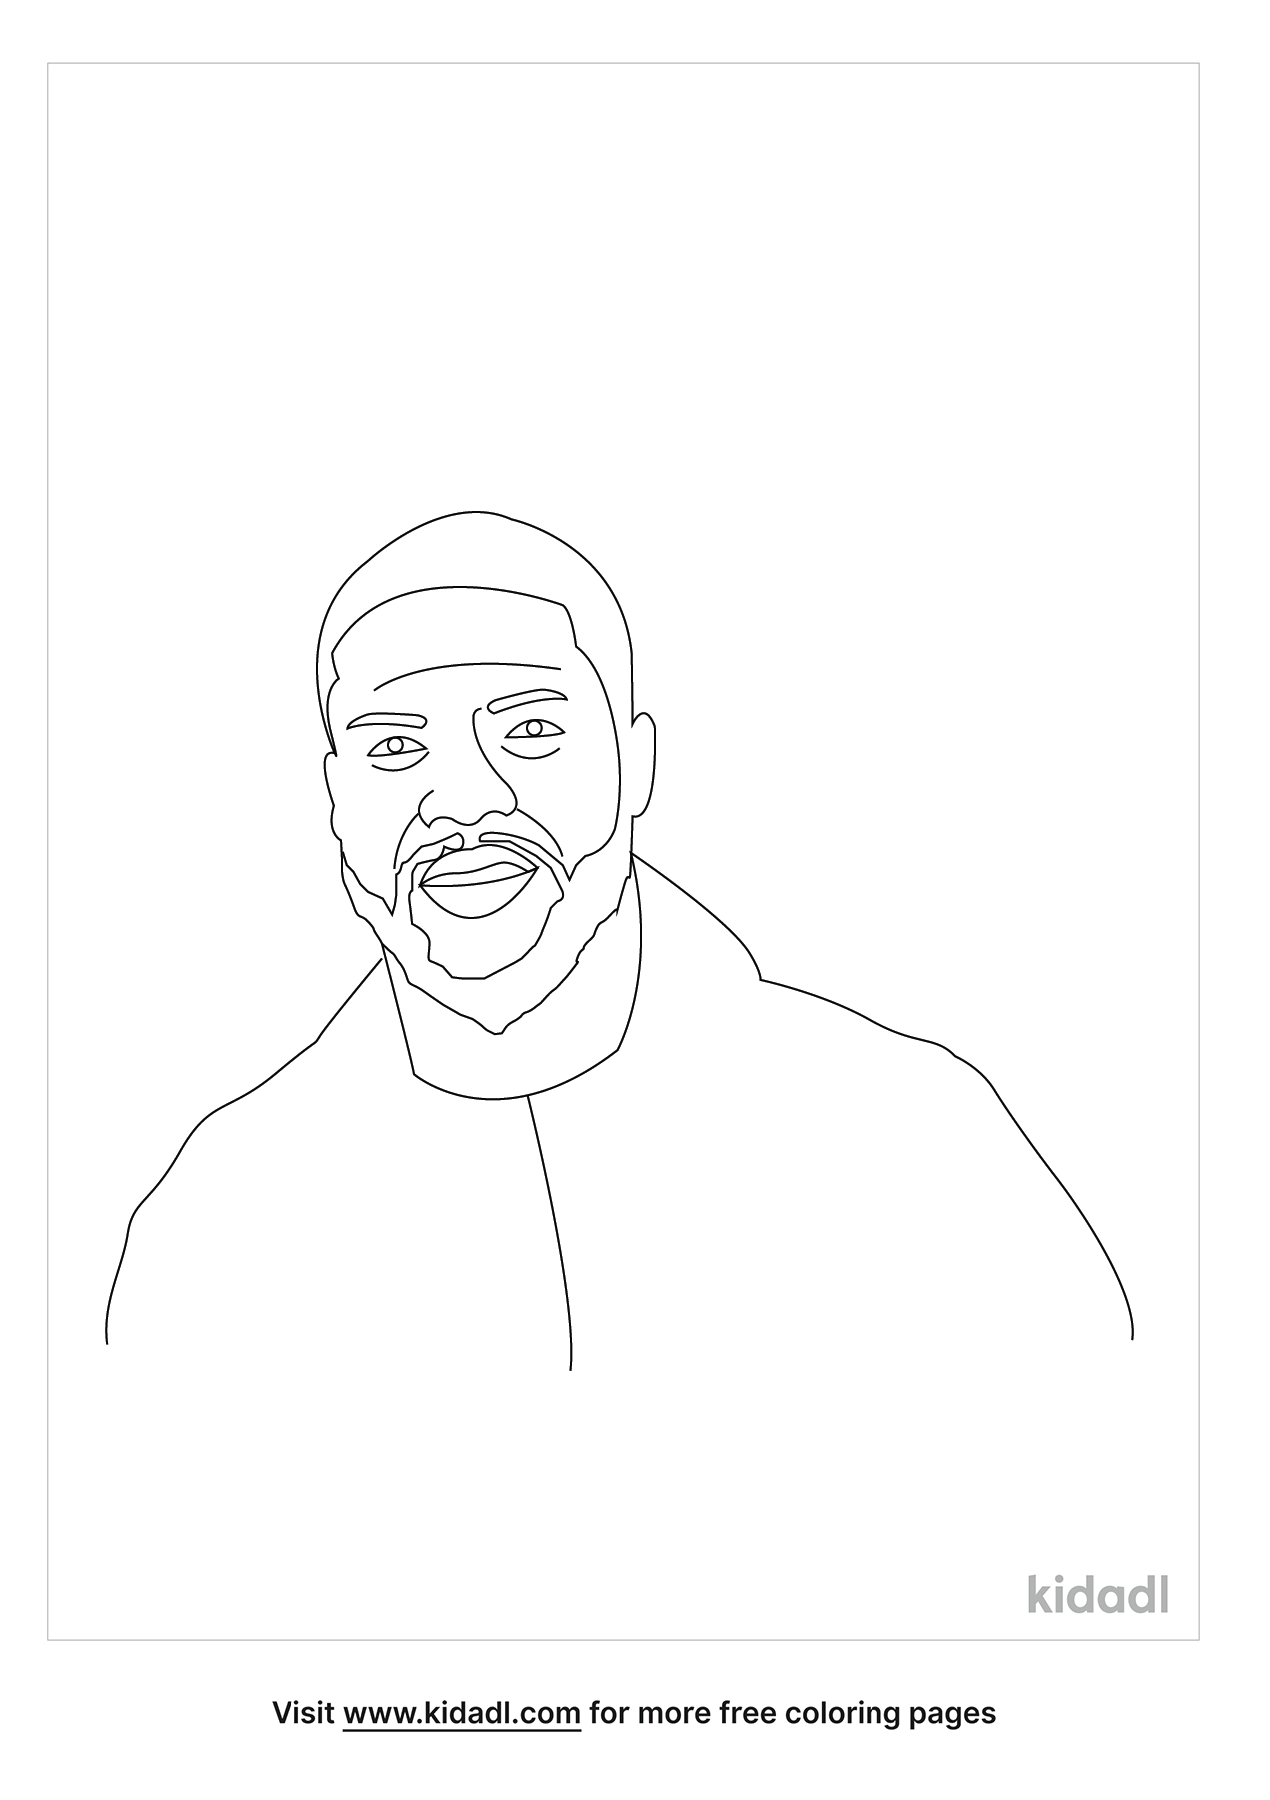 Kevin Hart Coloring Pages | Free People Coloring Pages | Kidadl